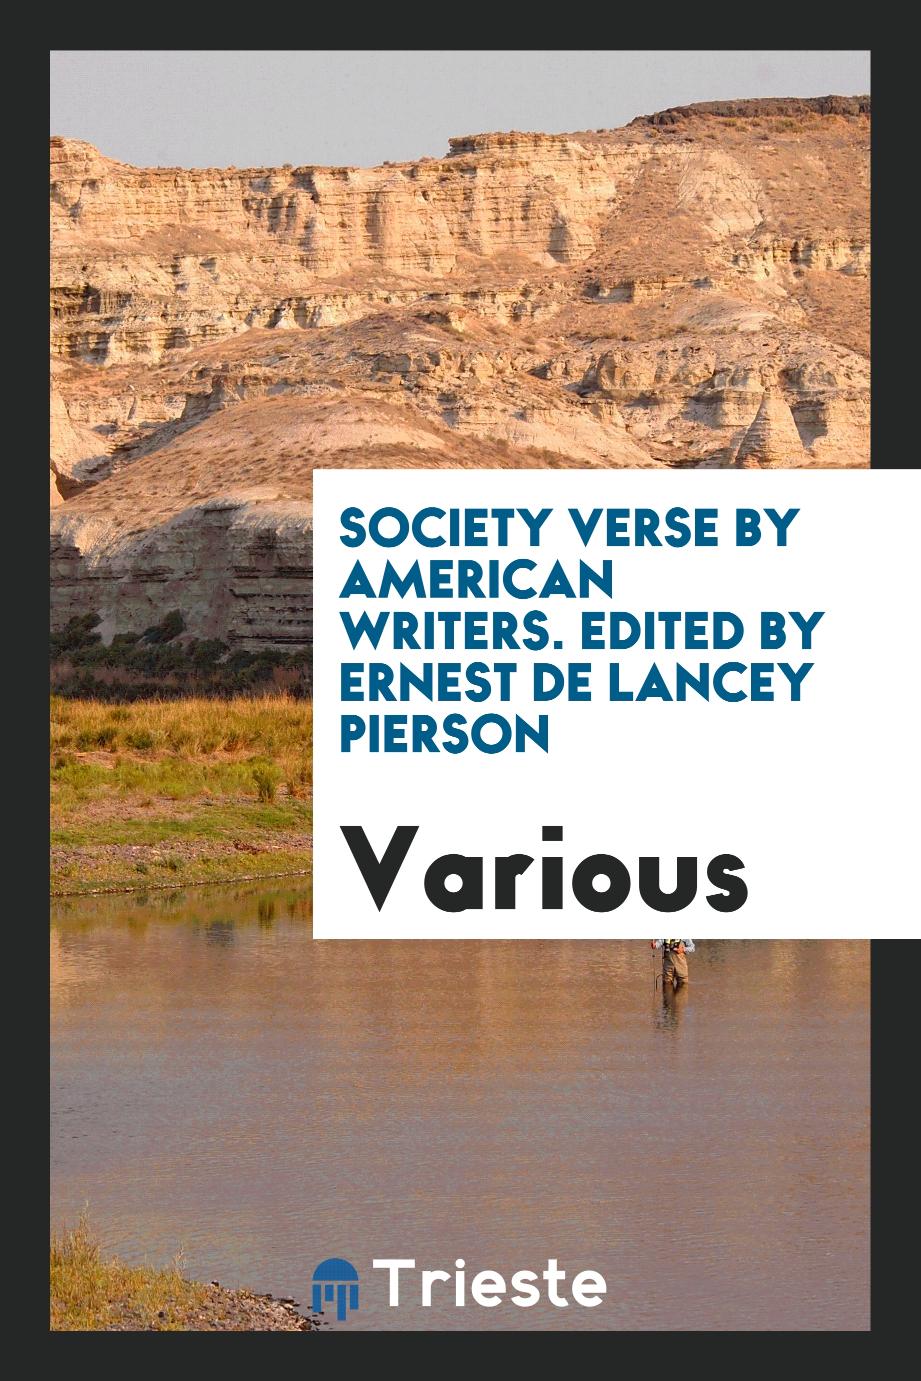 Society Verse by American Writers. Edited by Ernest de Lancey Pierson